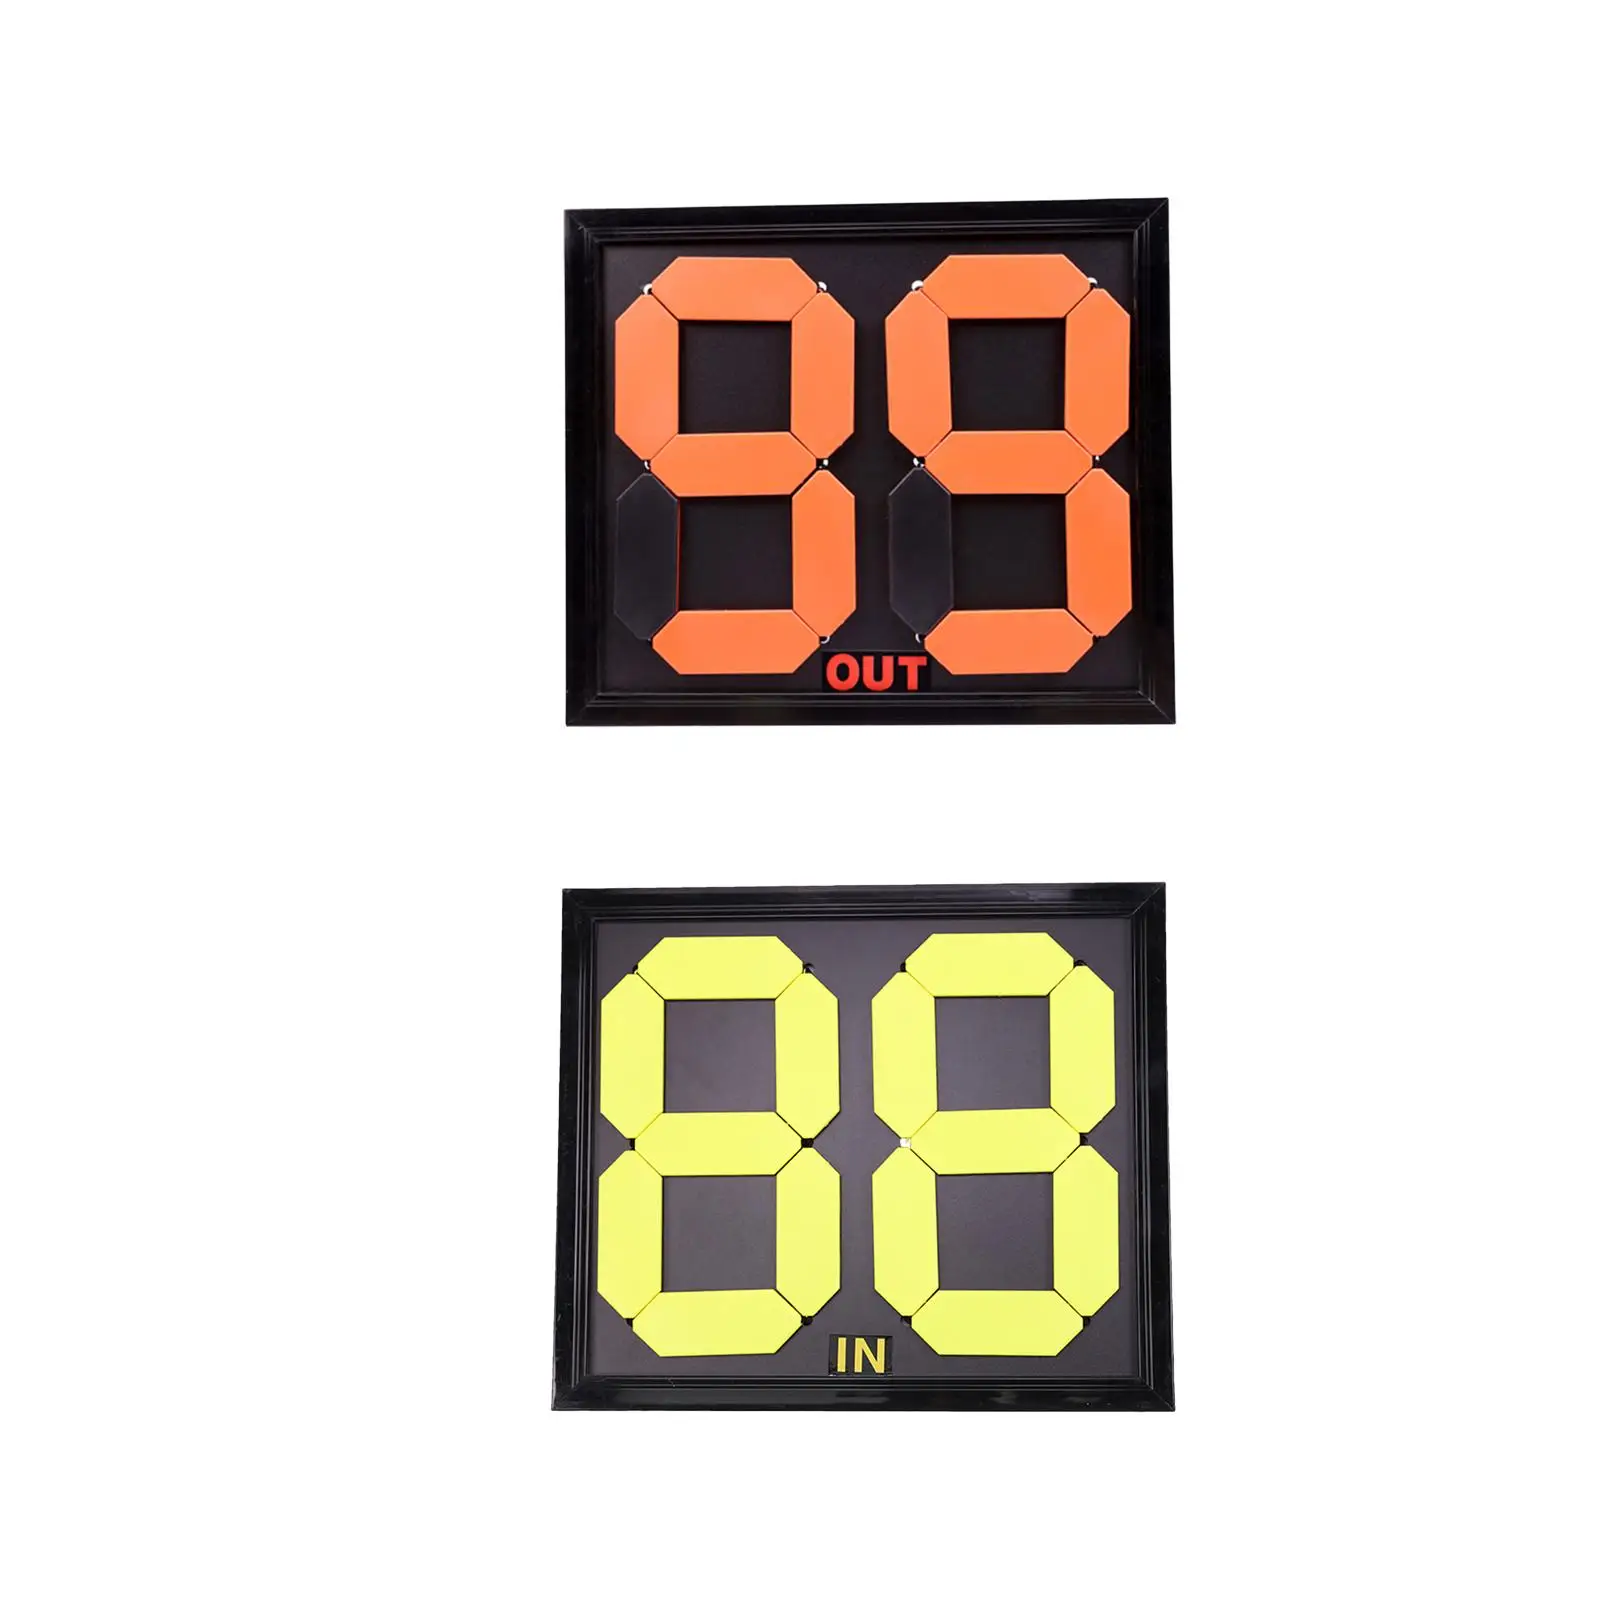 2x Two Digit Numbers Soccer Football Substitution Board Manual Flip Bright Color